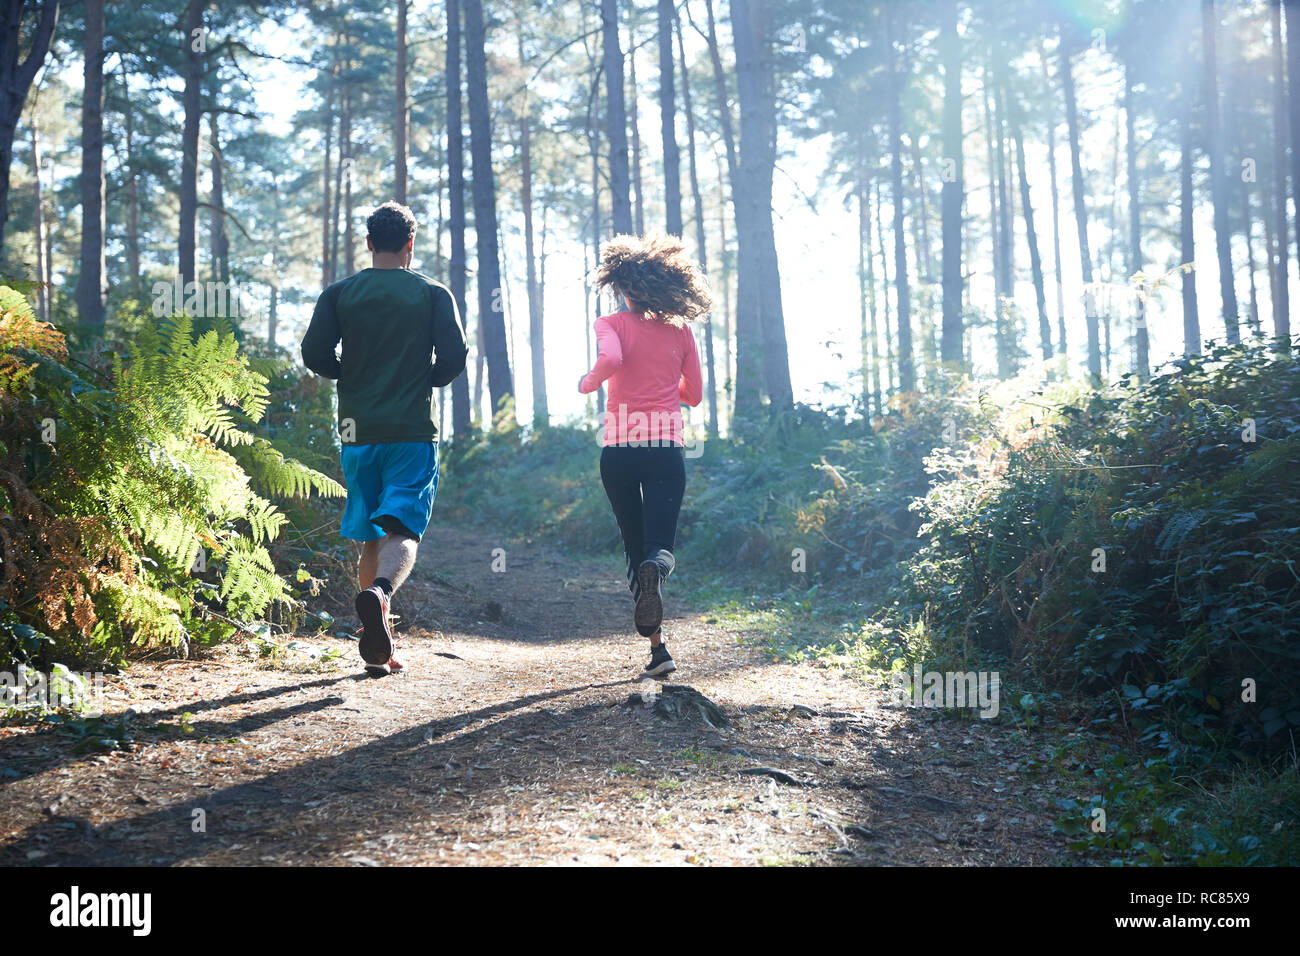 Female and male runners running in sunlit forest, rear view Stock Photo